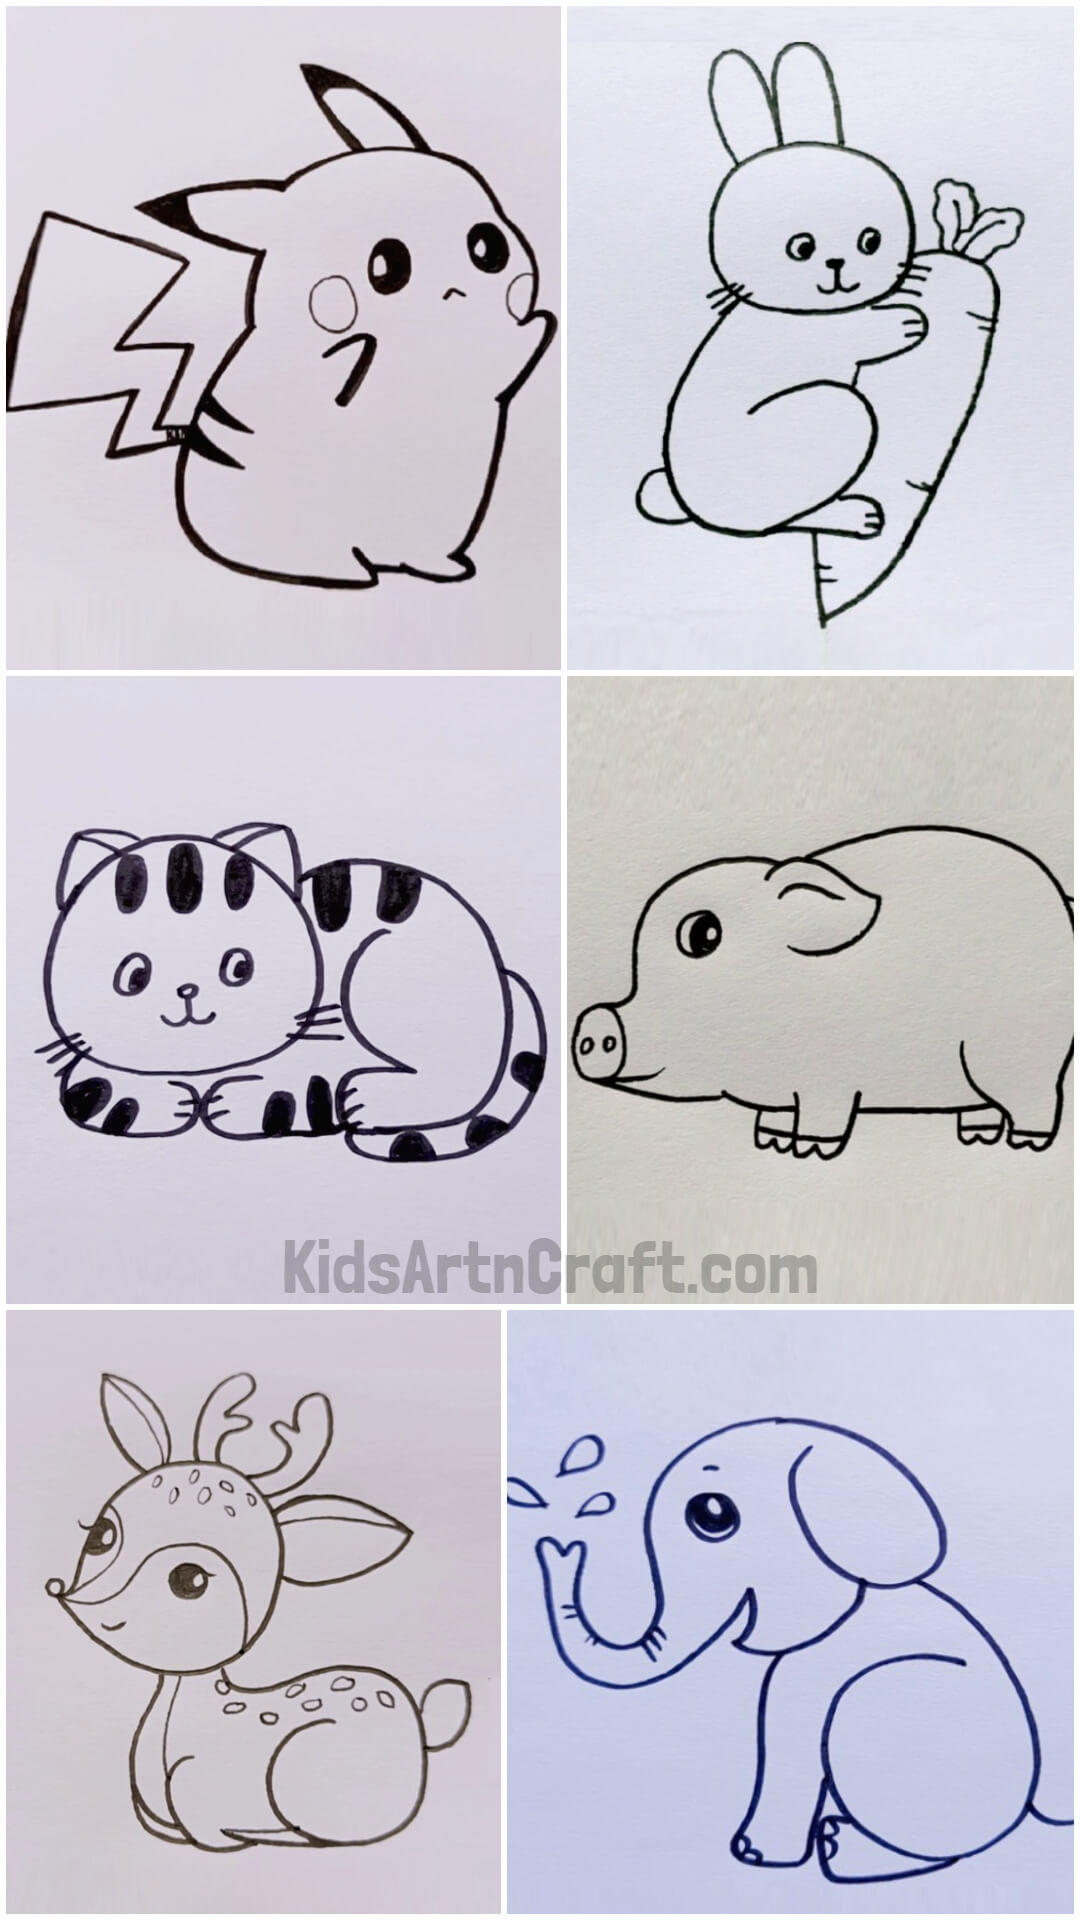 Enhance Your Drawing Skills with Cute Animals